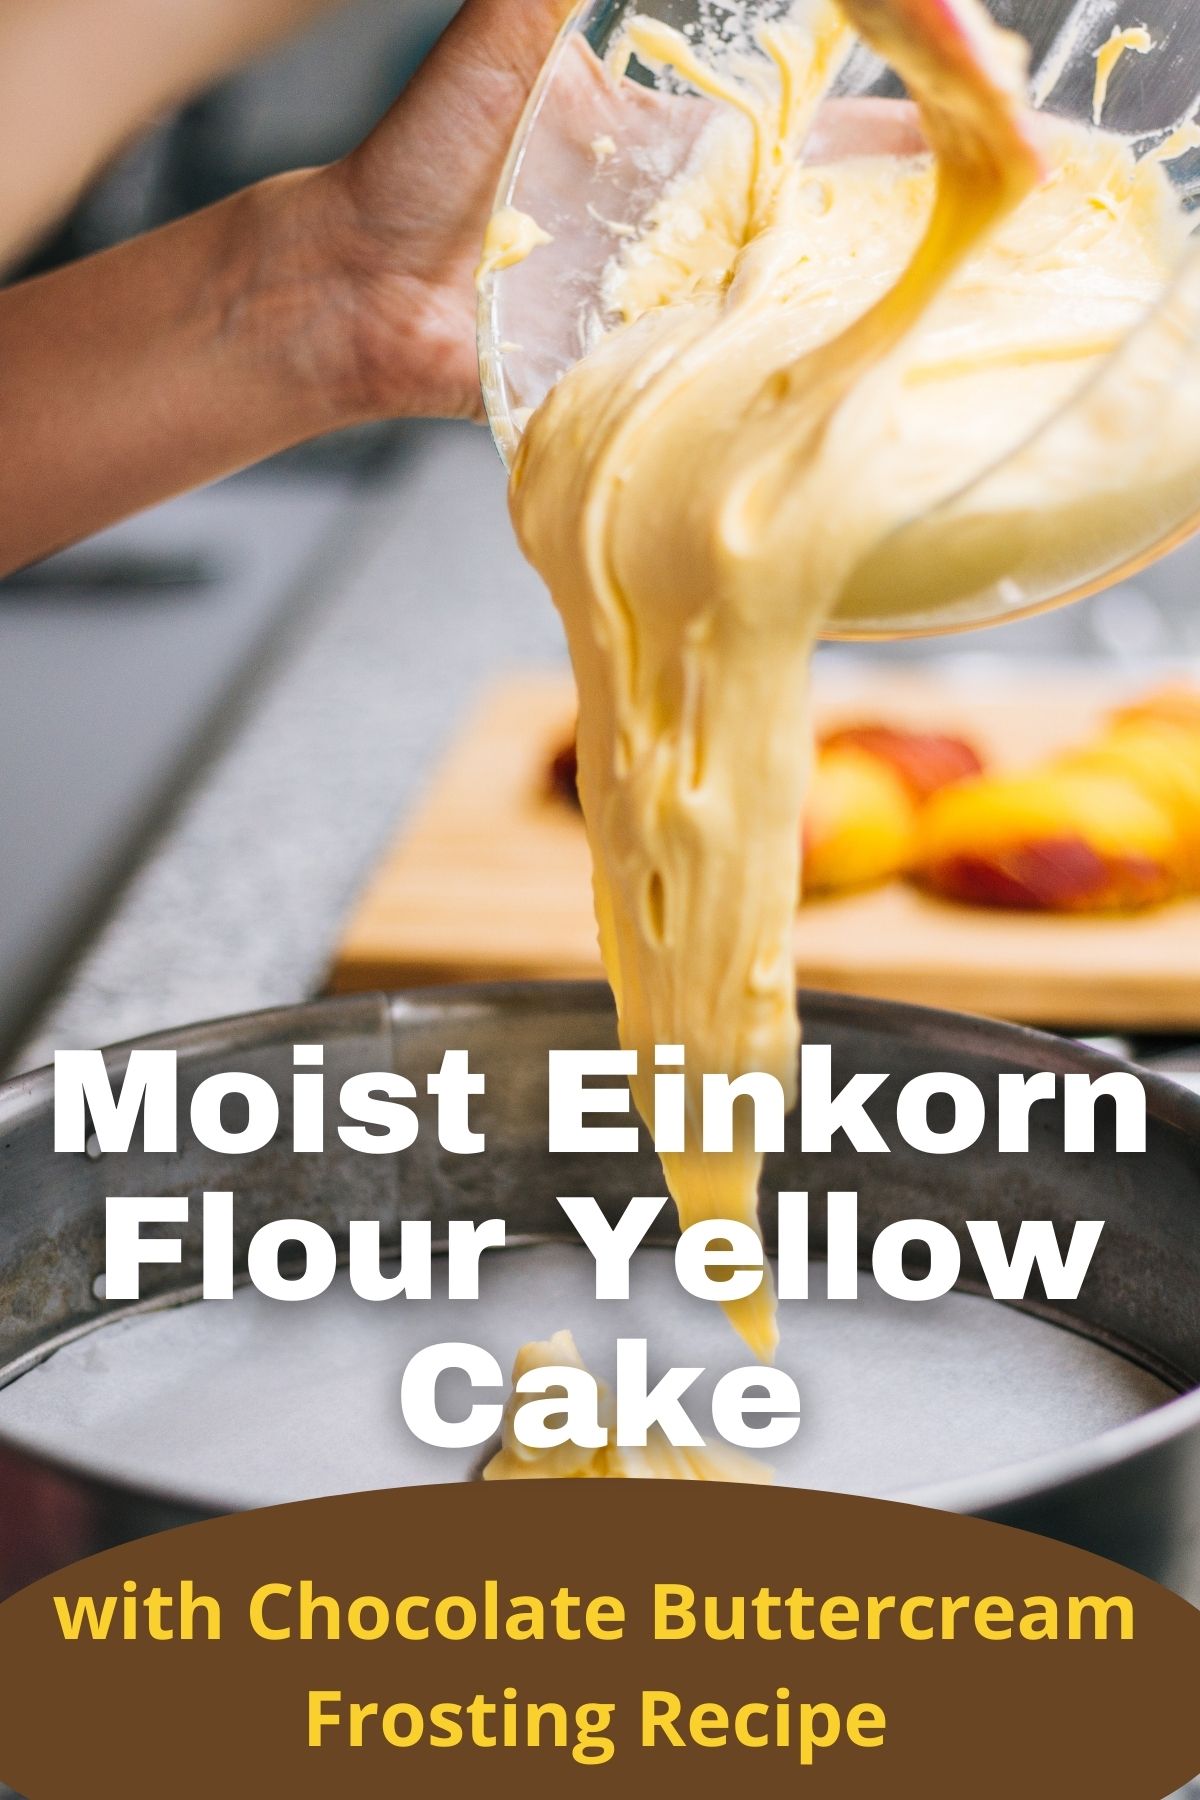 Einkorn flour yellow cake batter being poured into a pan